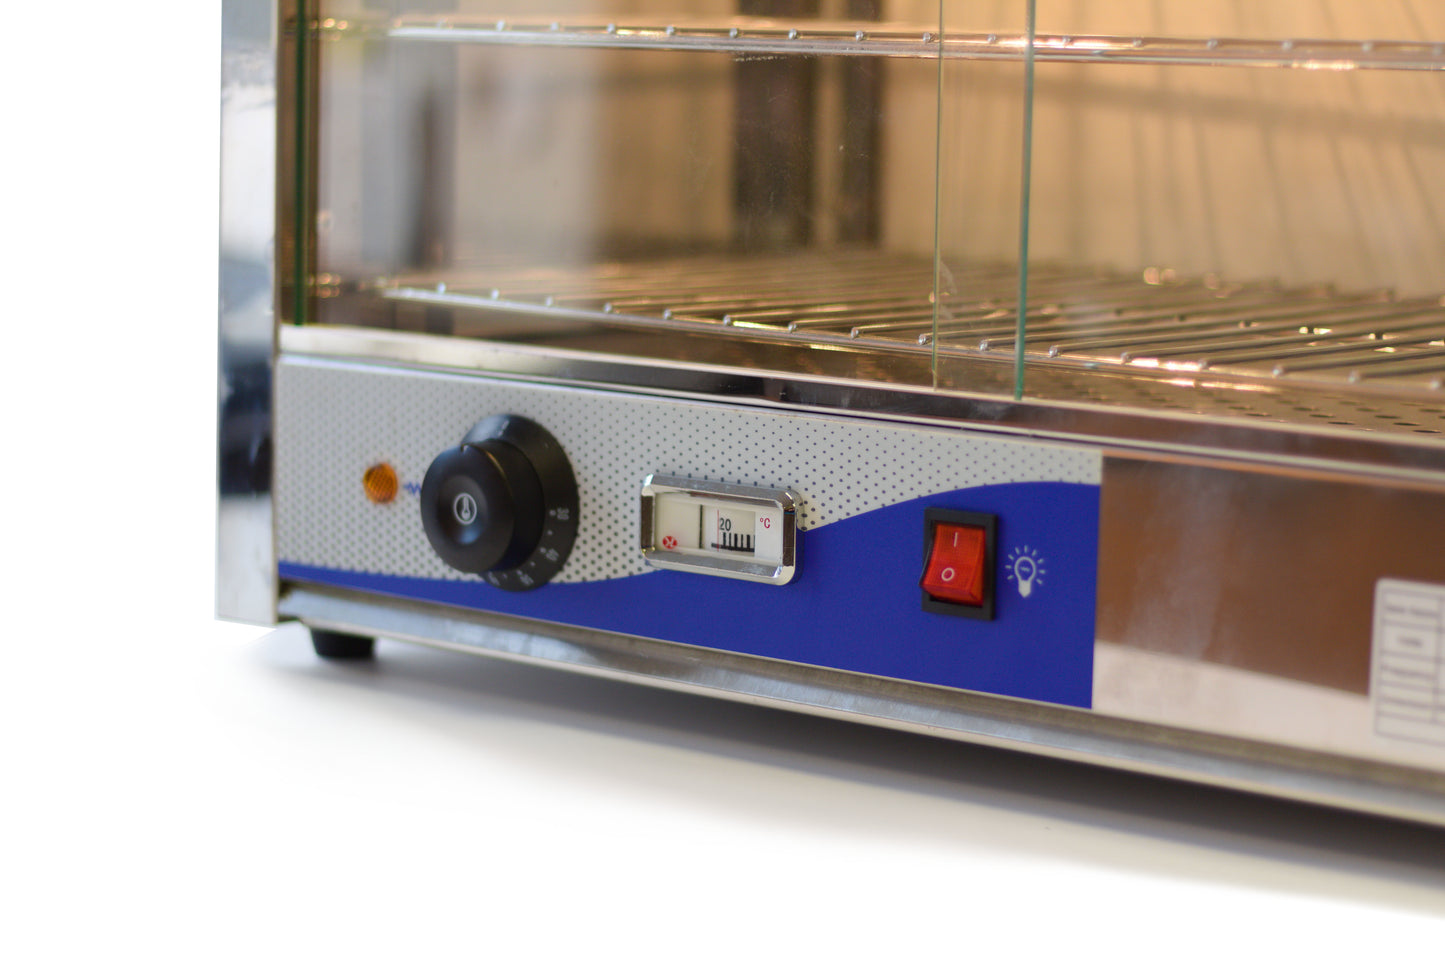 Chef-Hub Commercial Electric Counter Top Heated Glass Display